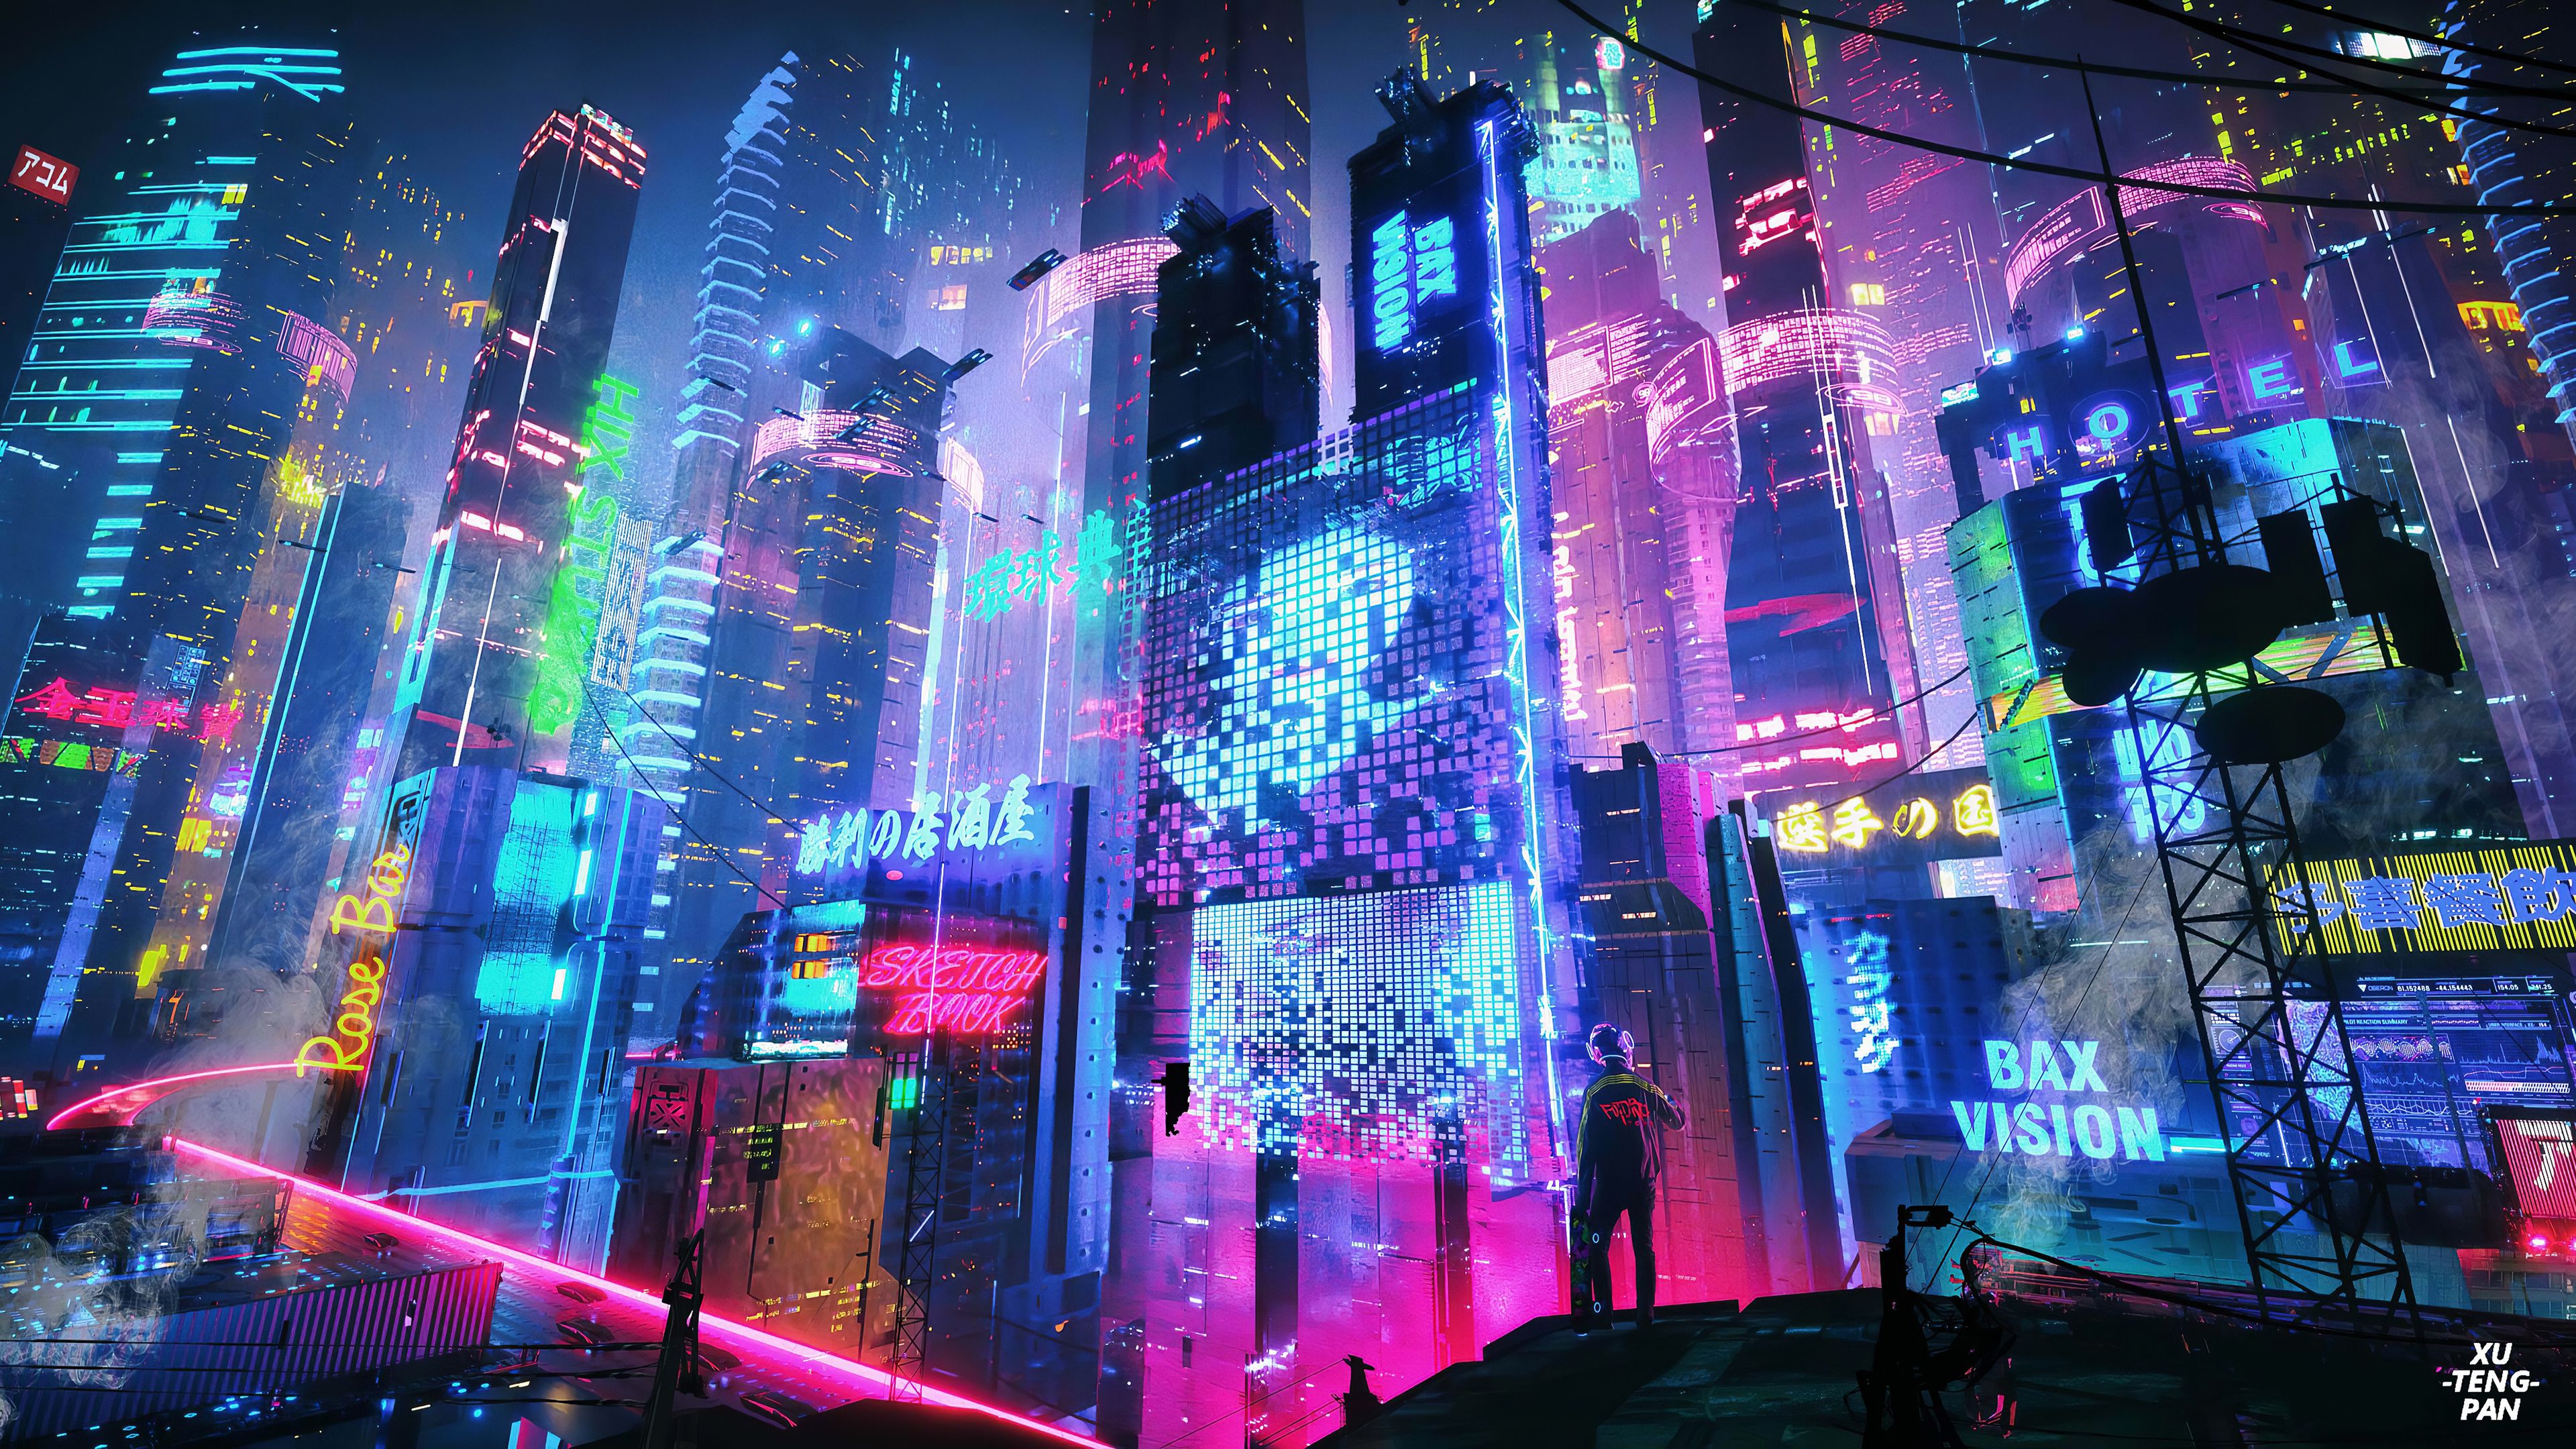 Cyberpunk City Future Digital Art Wallpaper,HD Artist Wallpapers,4k  Wallpapers,Images,Backgrounds,Photos and Pictures